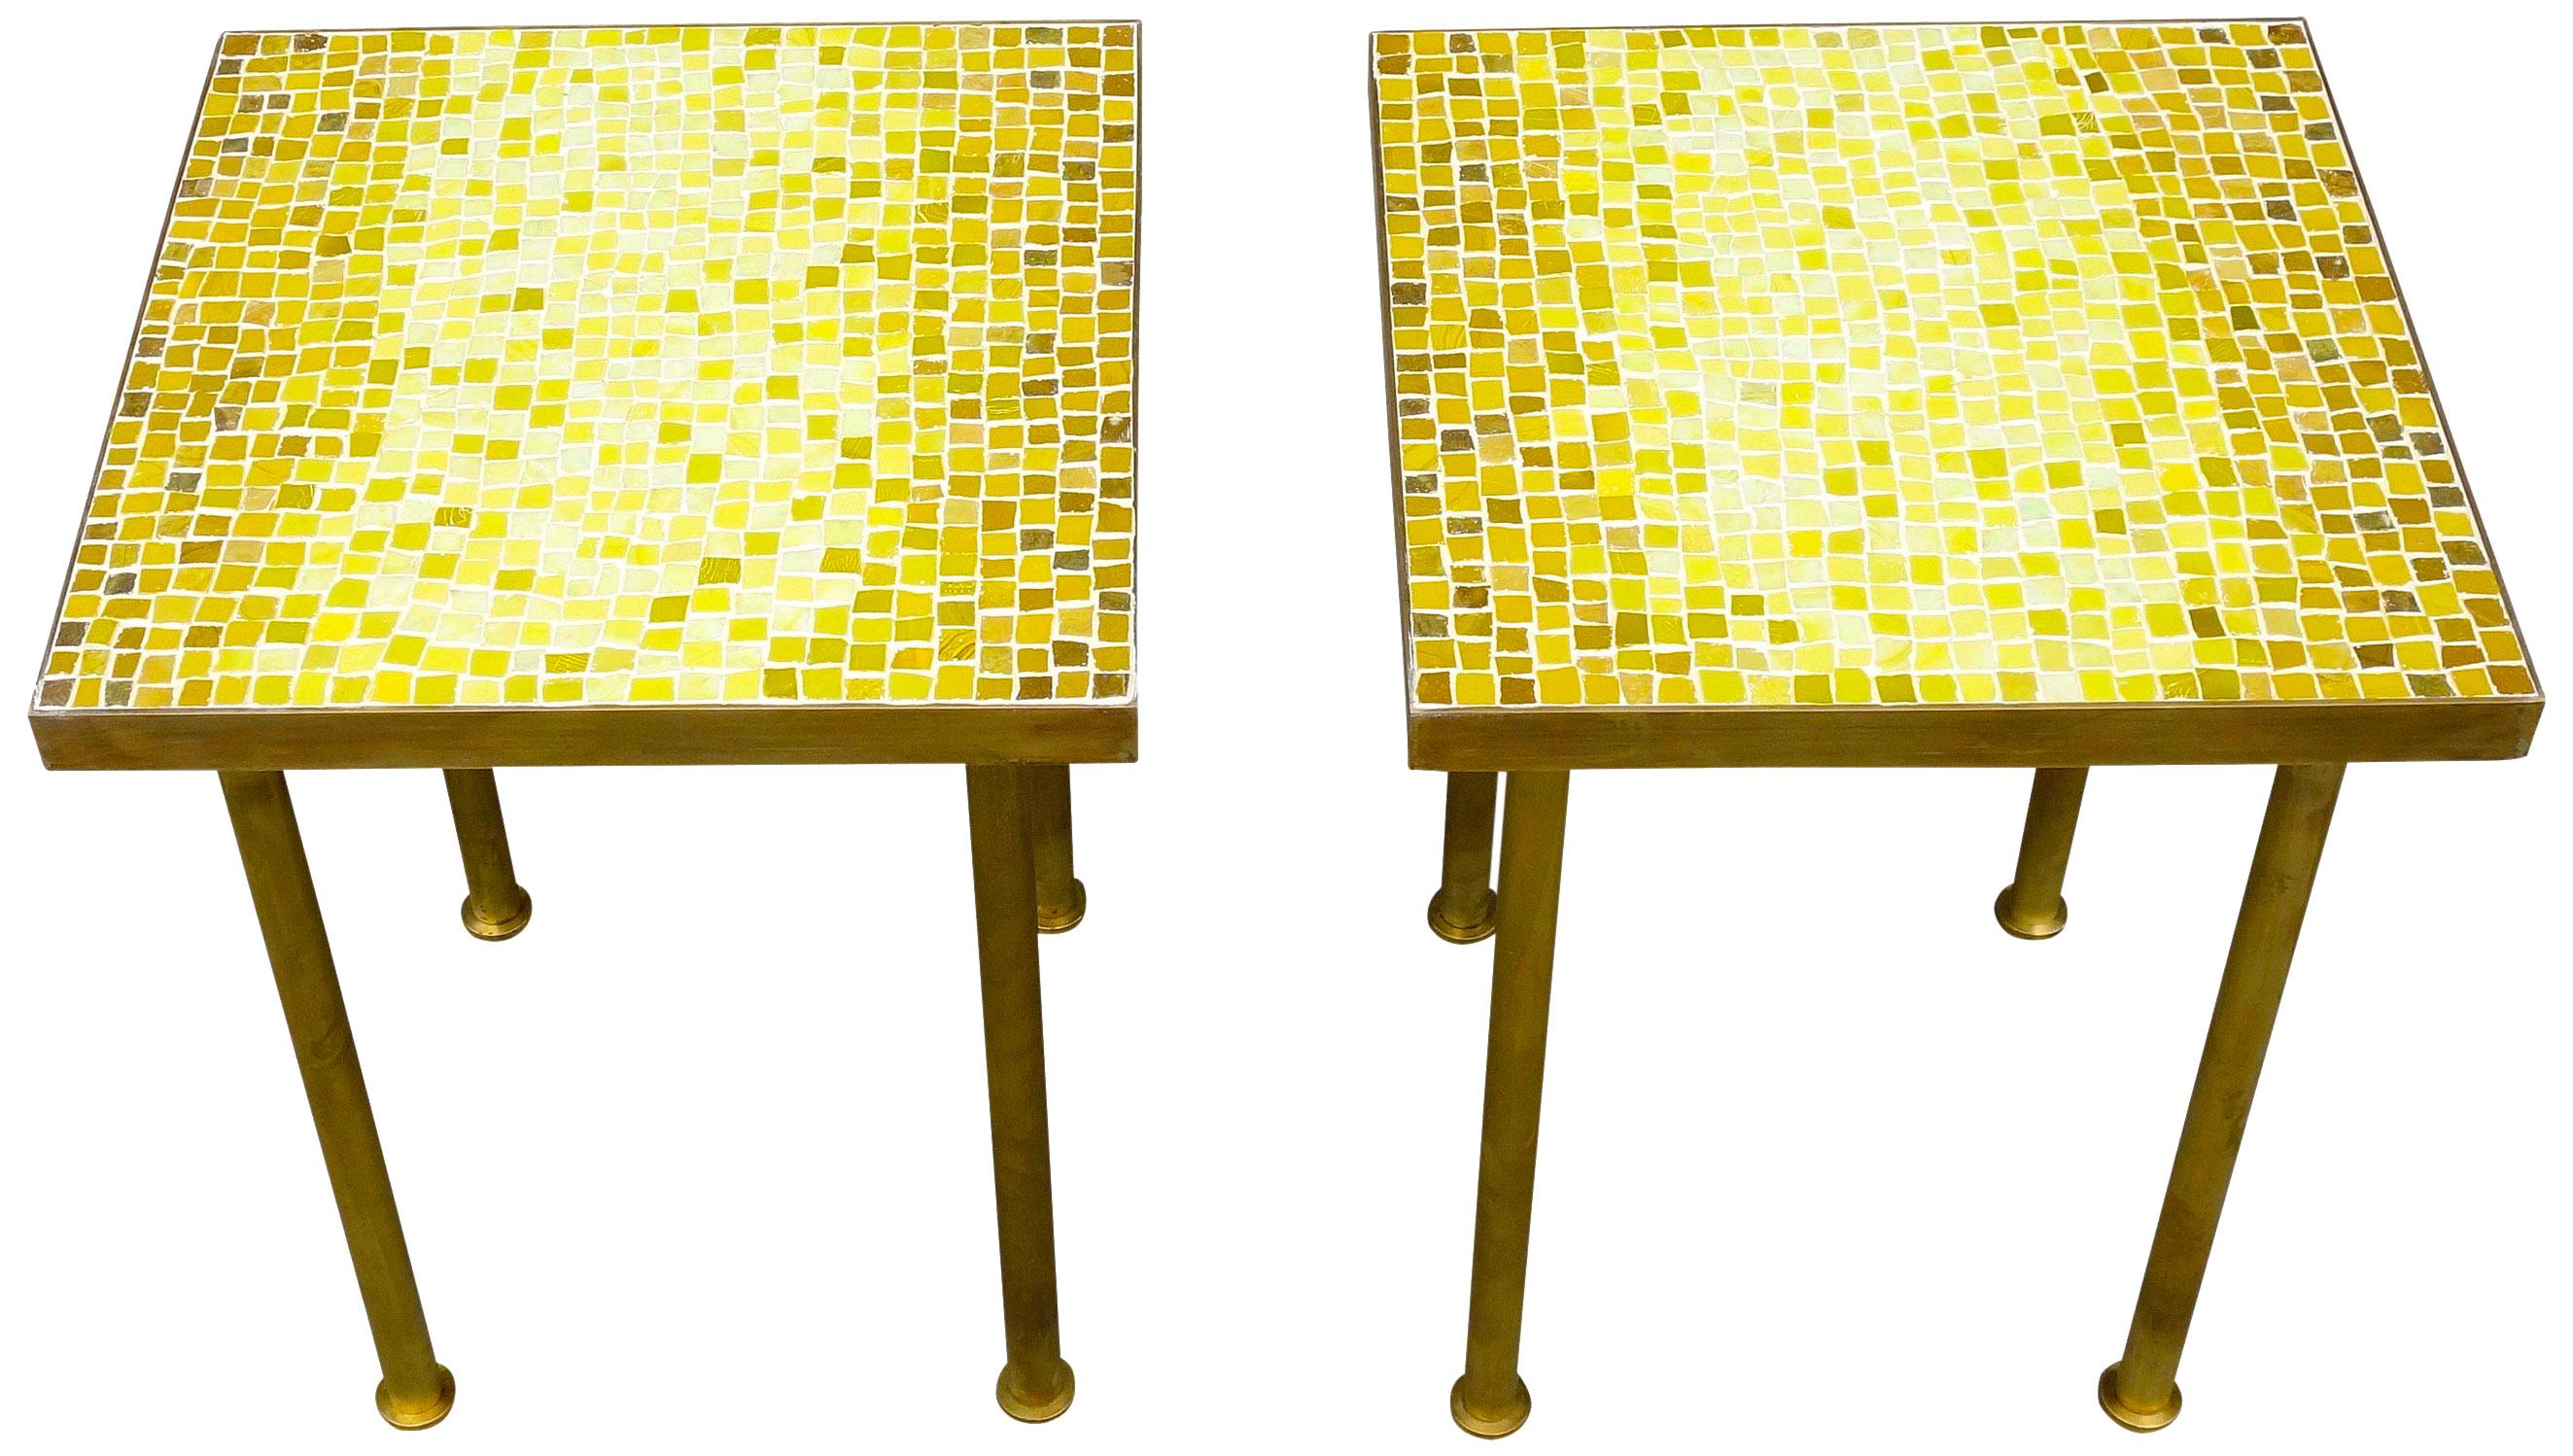 For your consideration is this incredible pair of smalti glass mosaic side tables on a solid brass frame. Wonderful shades of yellow will highlight your space with a midcentury aesthetic that can match any decor.  Designed by Yupadee 